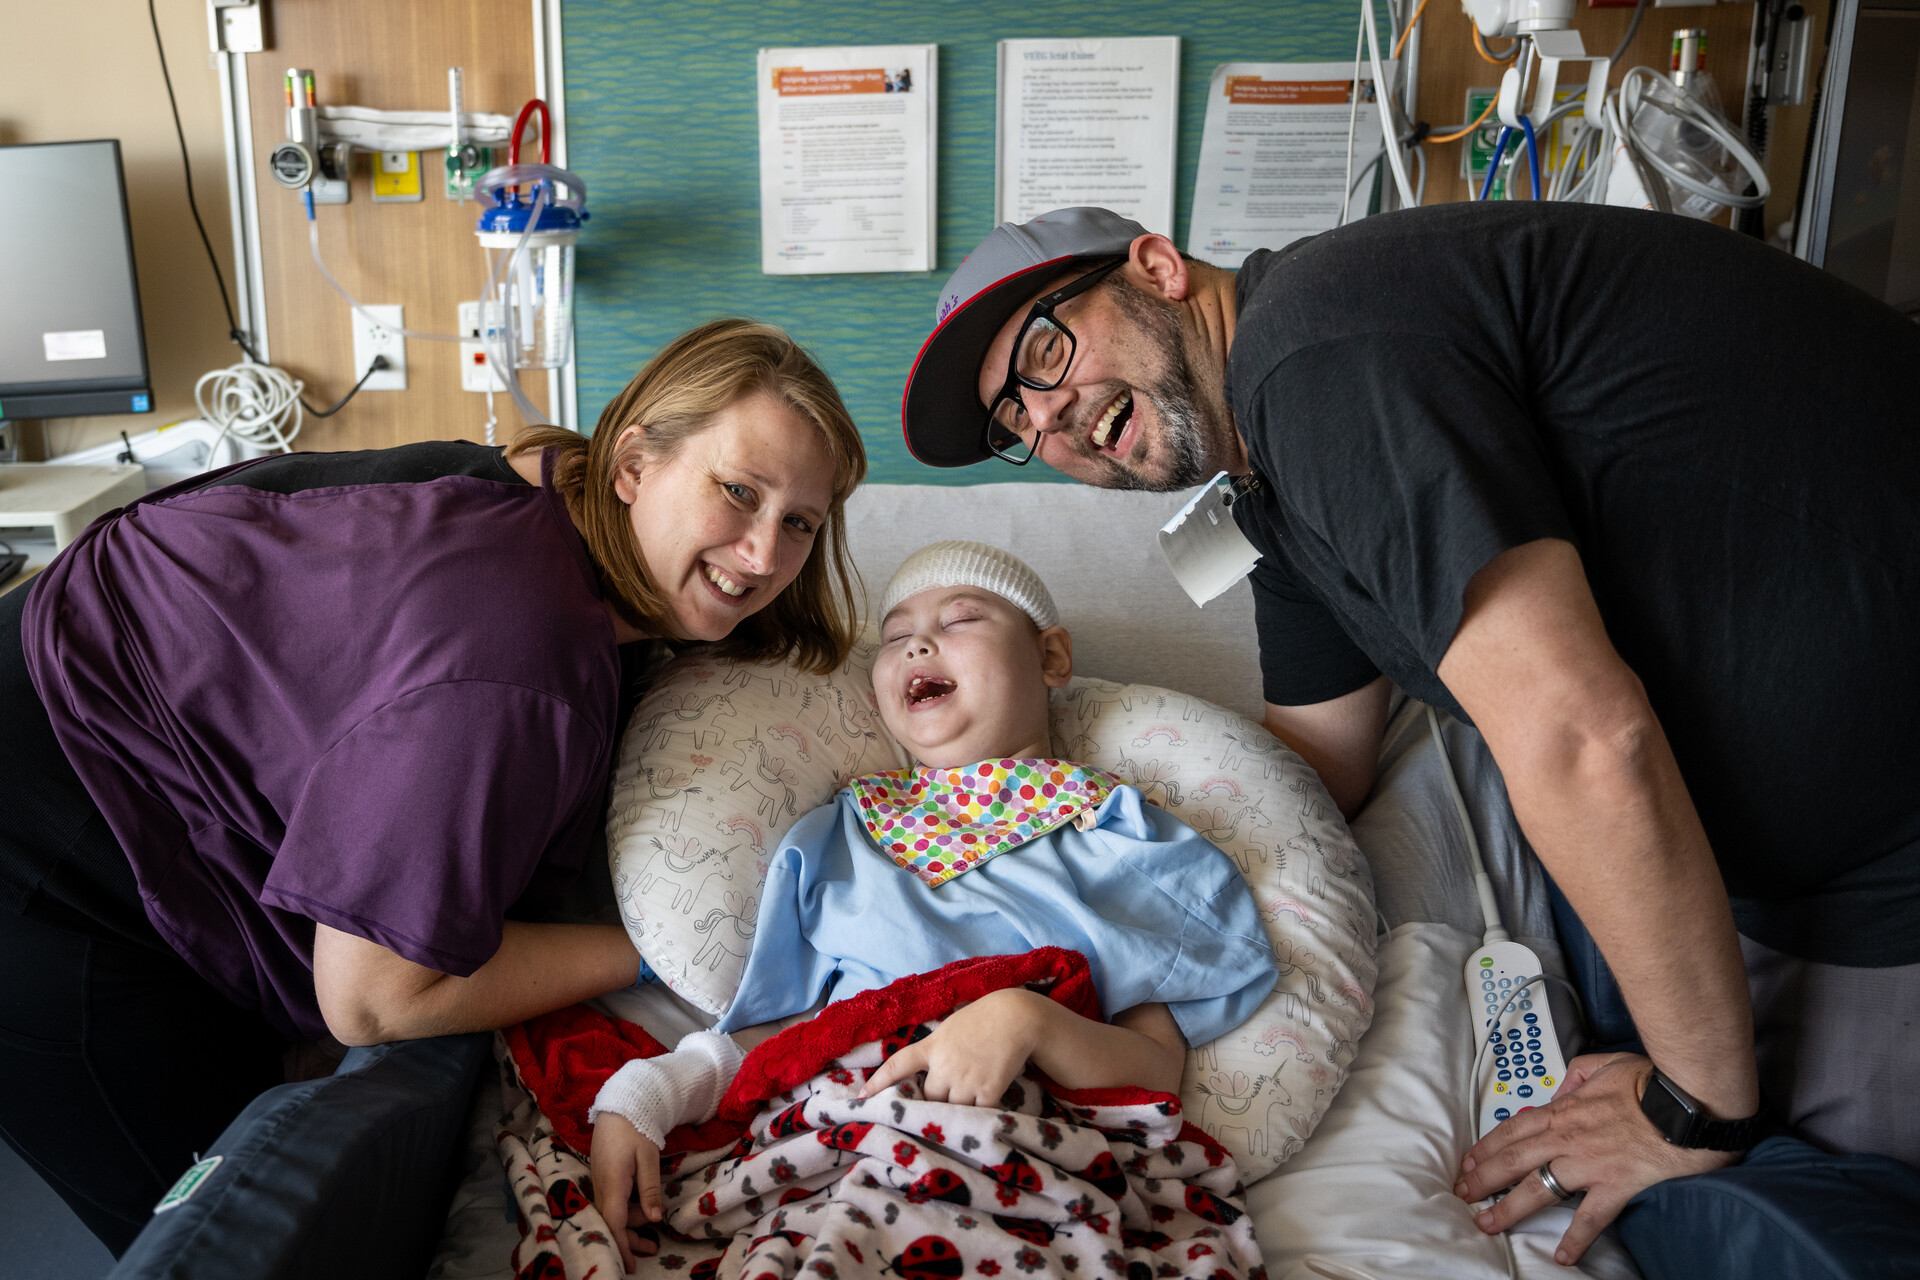 A smiling woman and man lean over a broadly smiling child who lays in a hospital bed